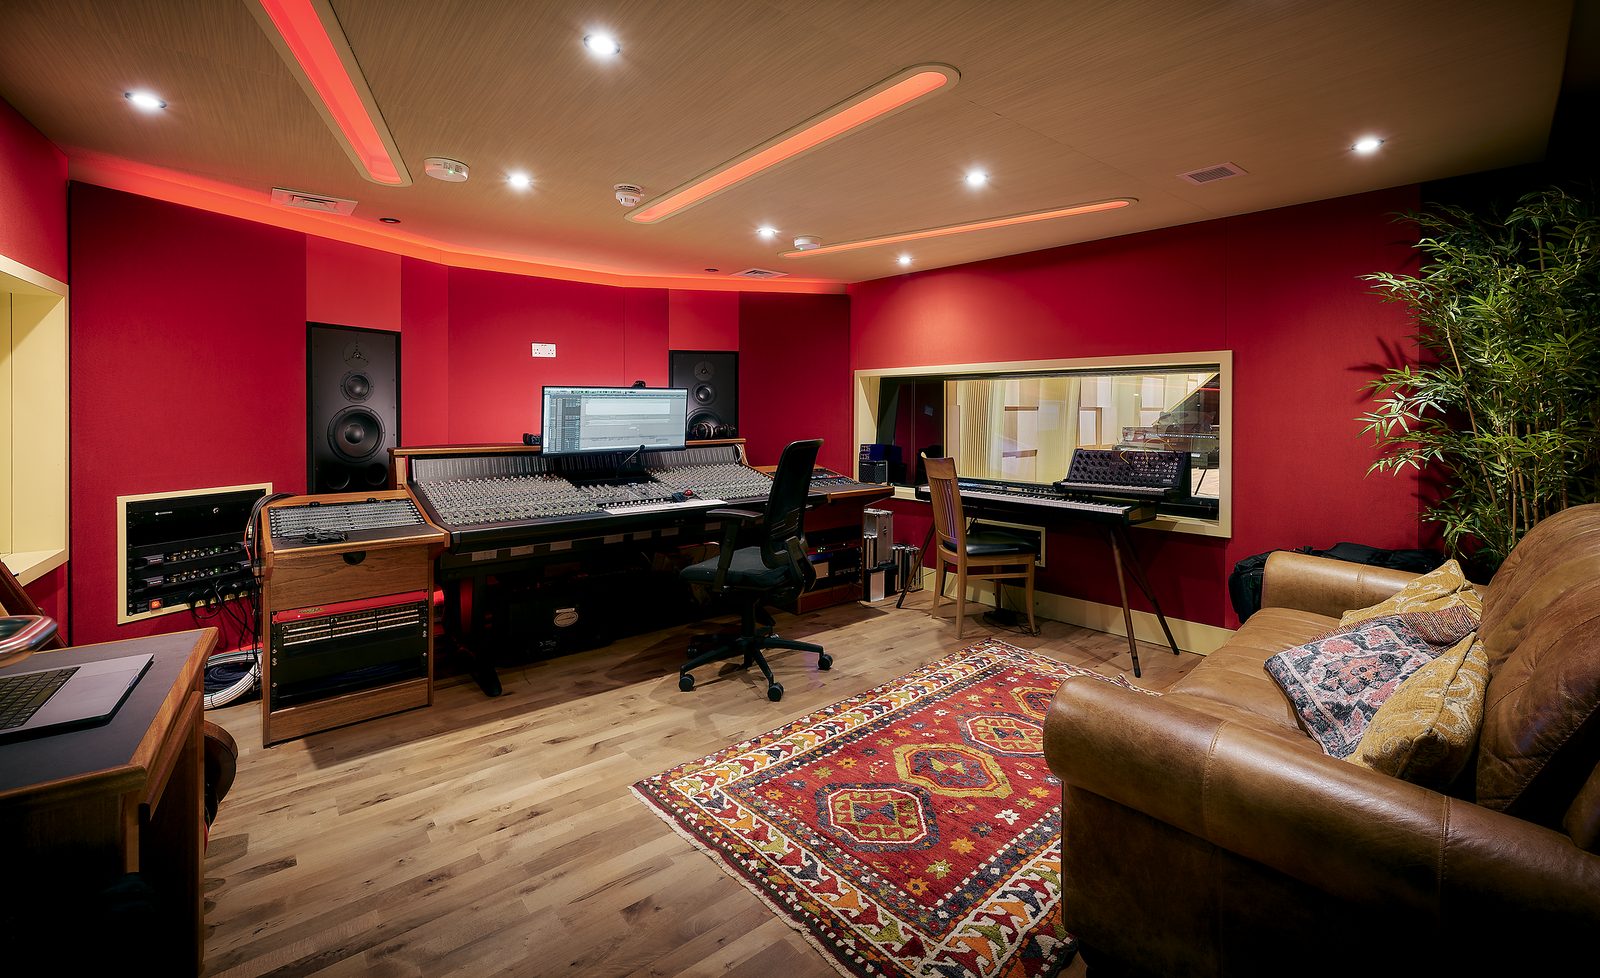 A recording studio, with sound desk and equipment, sofa and a rug